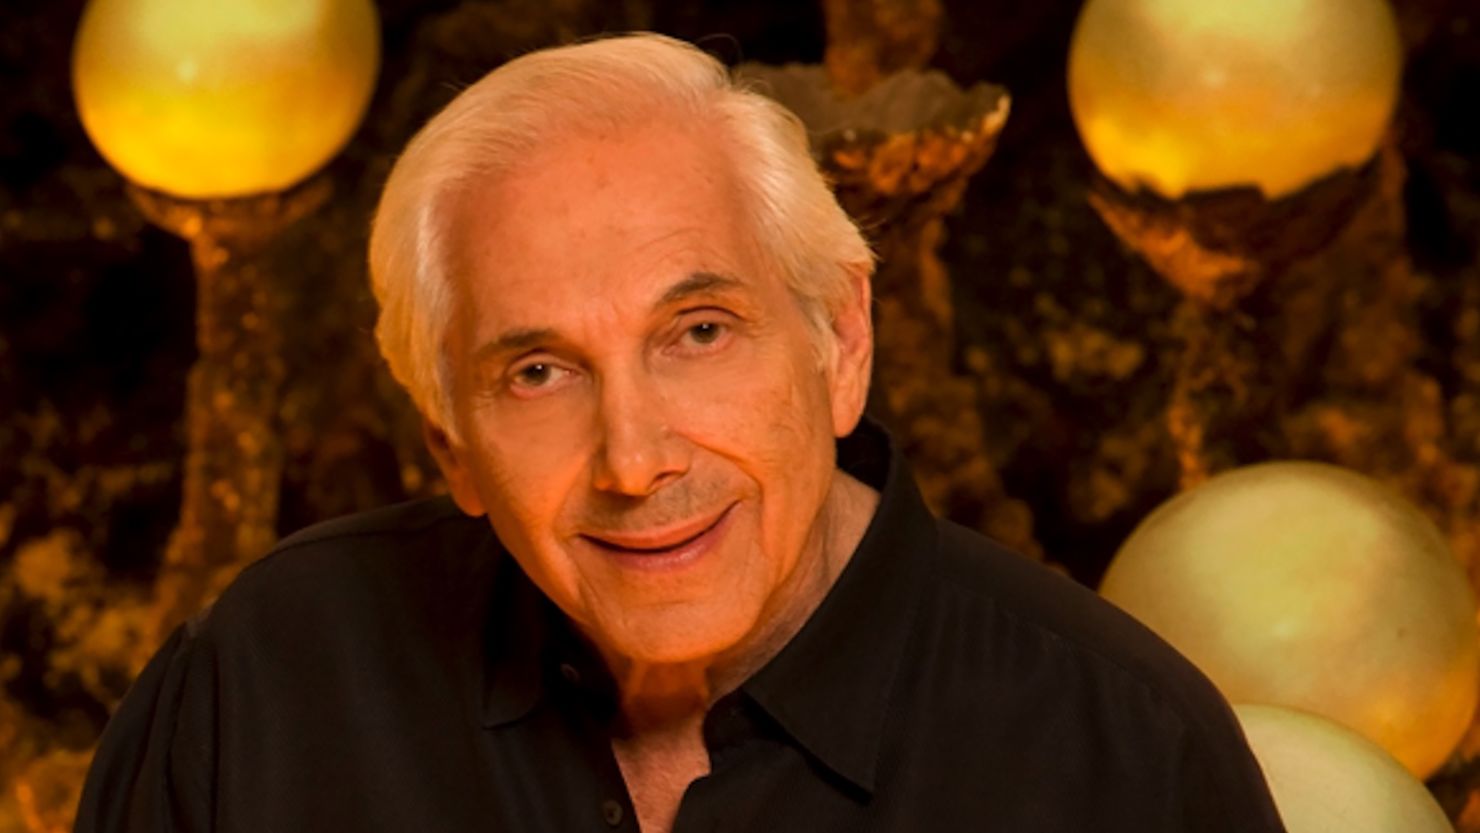 Marty Krofft, a legendary figure often referred to as the “King of Saturday Mornings," died Saturday in Los Angeles.